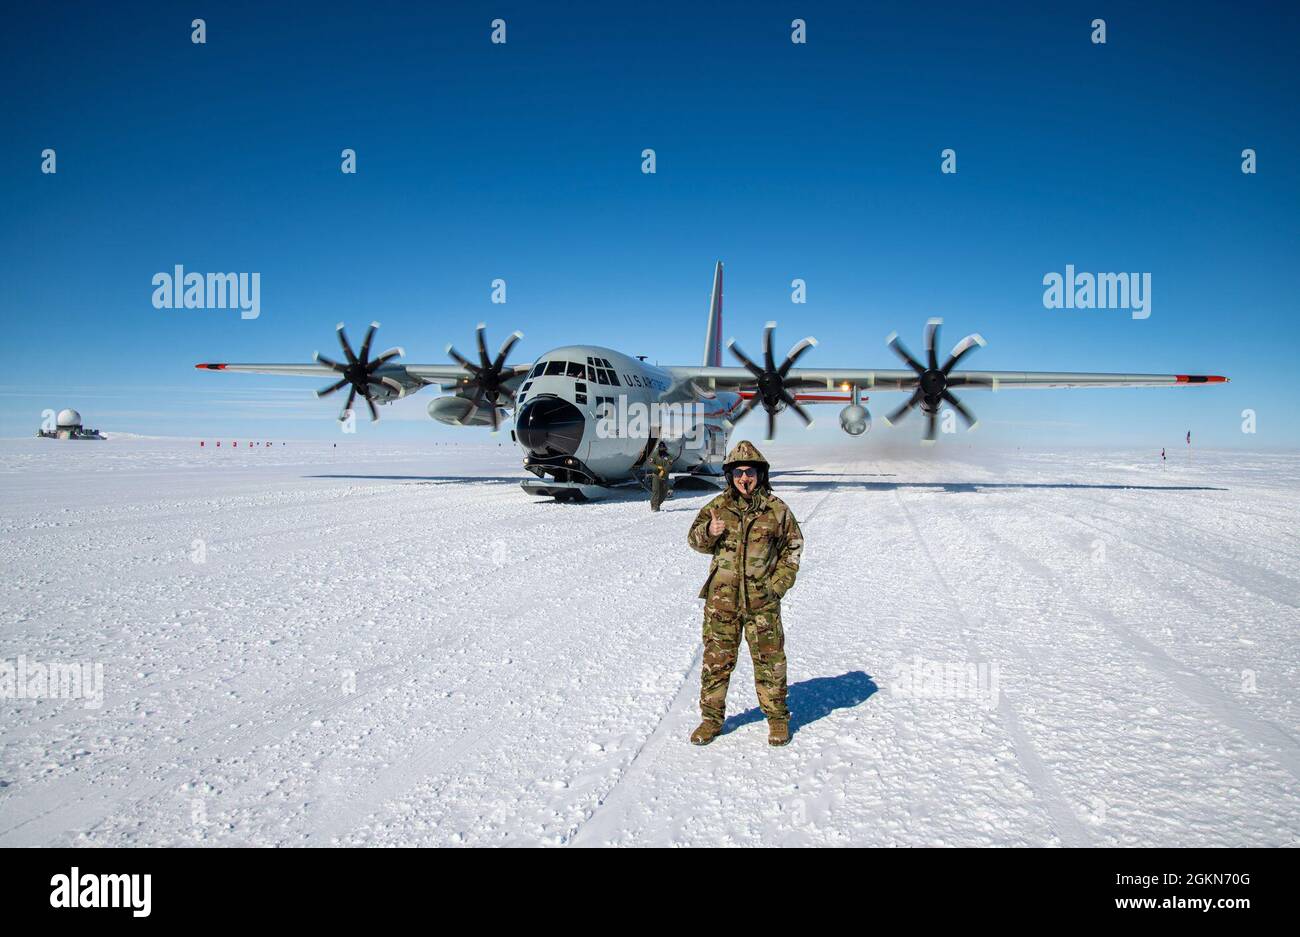 An Airmen assigned to the 109th Airlift Wing participates in a training mission at Raven Camp. Raven Camp is used to train members on landing on ice runways, polar airdrops and operating in the snow and ice conditions. The 109th operates in Greenland April-August each year to complete resupply missions for the National Science Foundation and polar operations training. Stock Photo